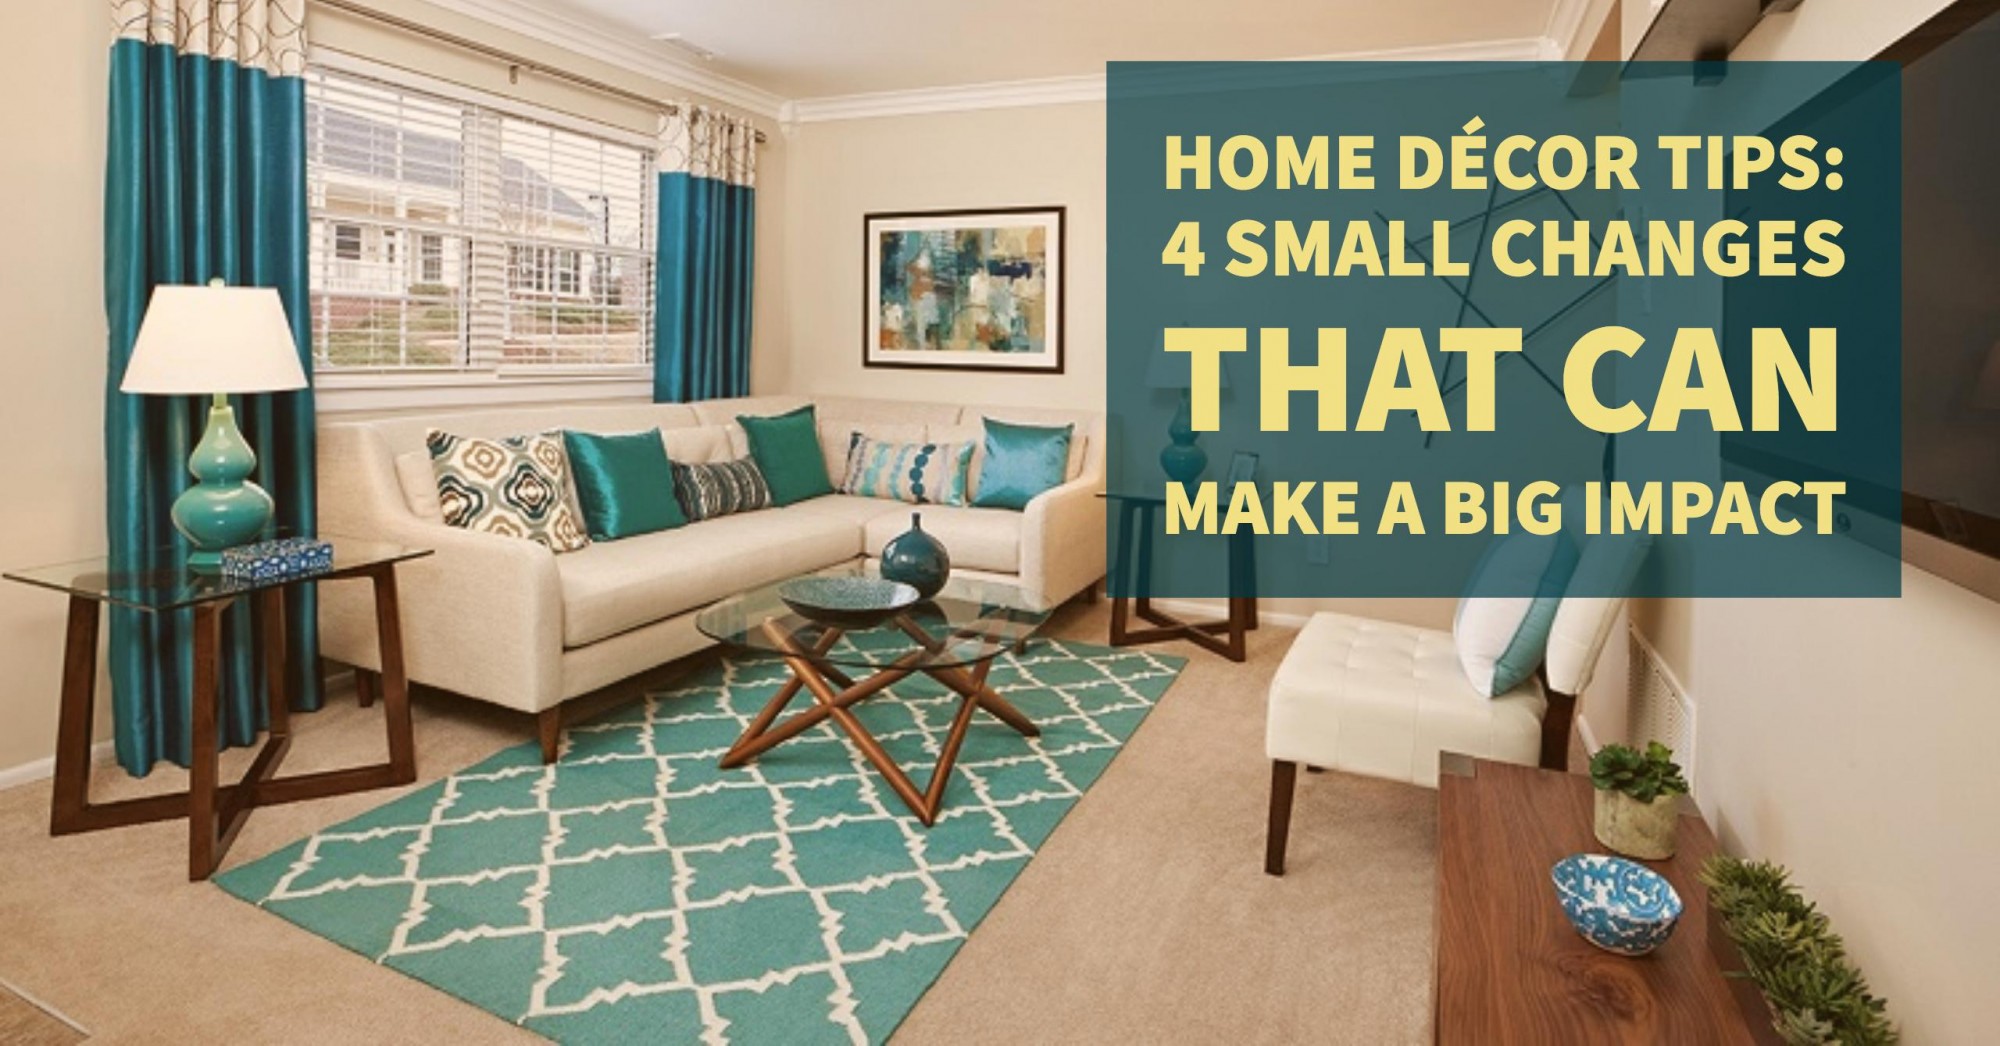 Home Decor Tips: 4 Small Changes that Can Make a Big Impact